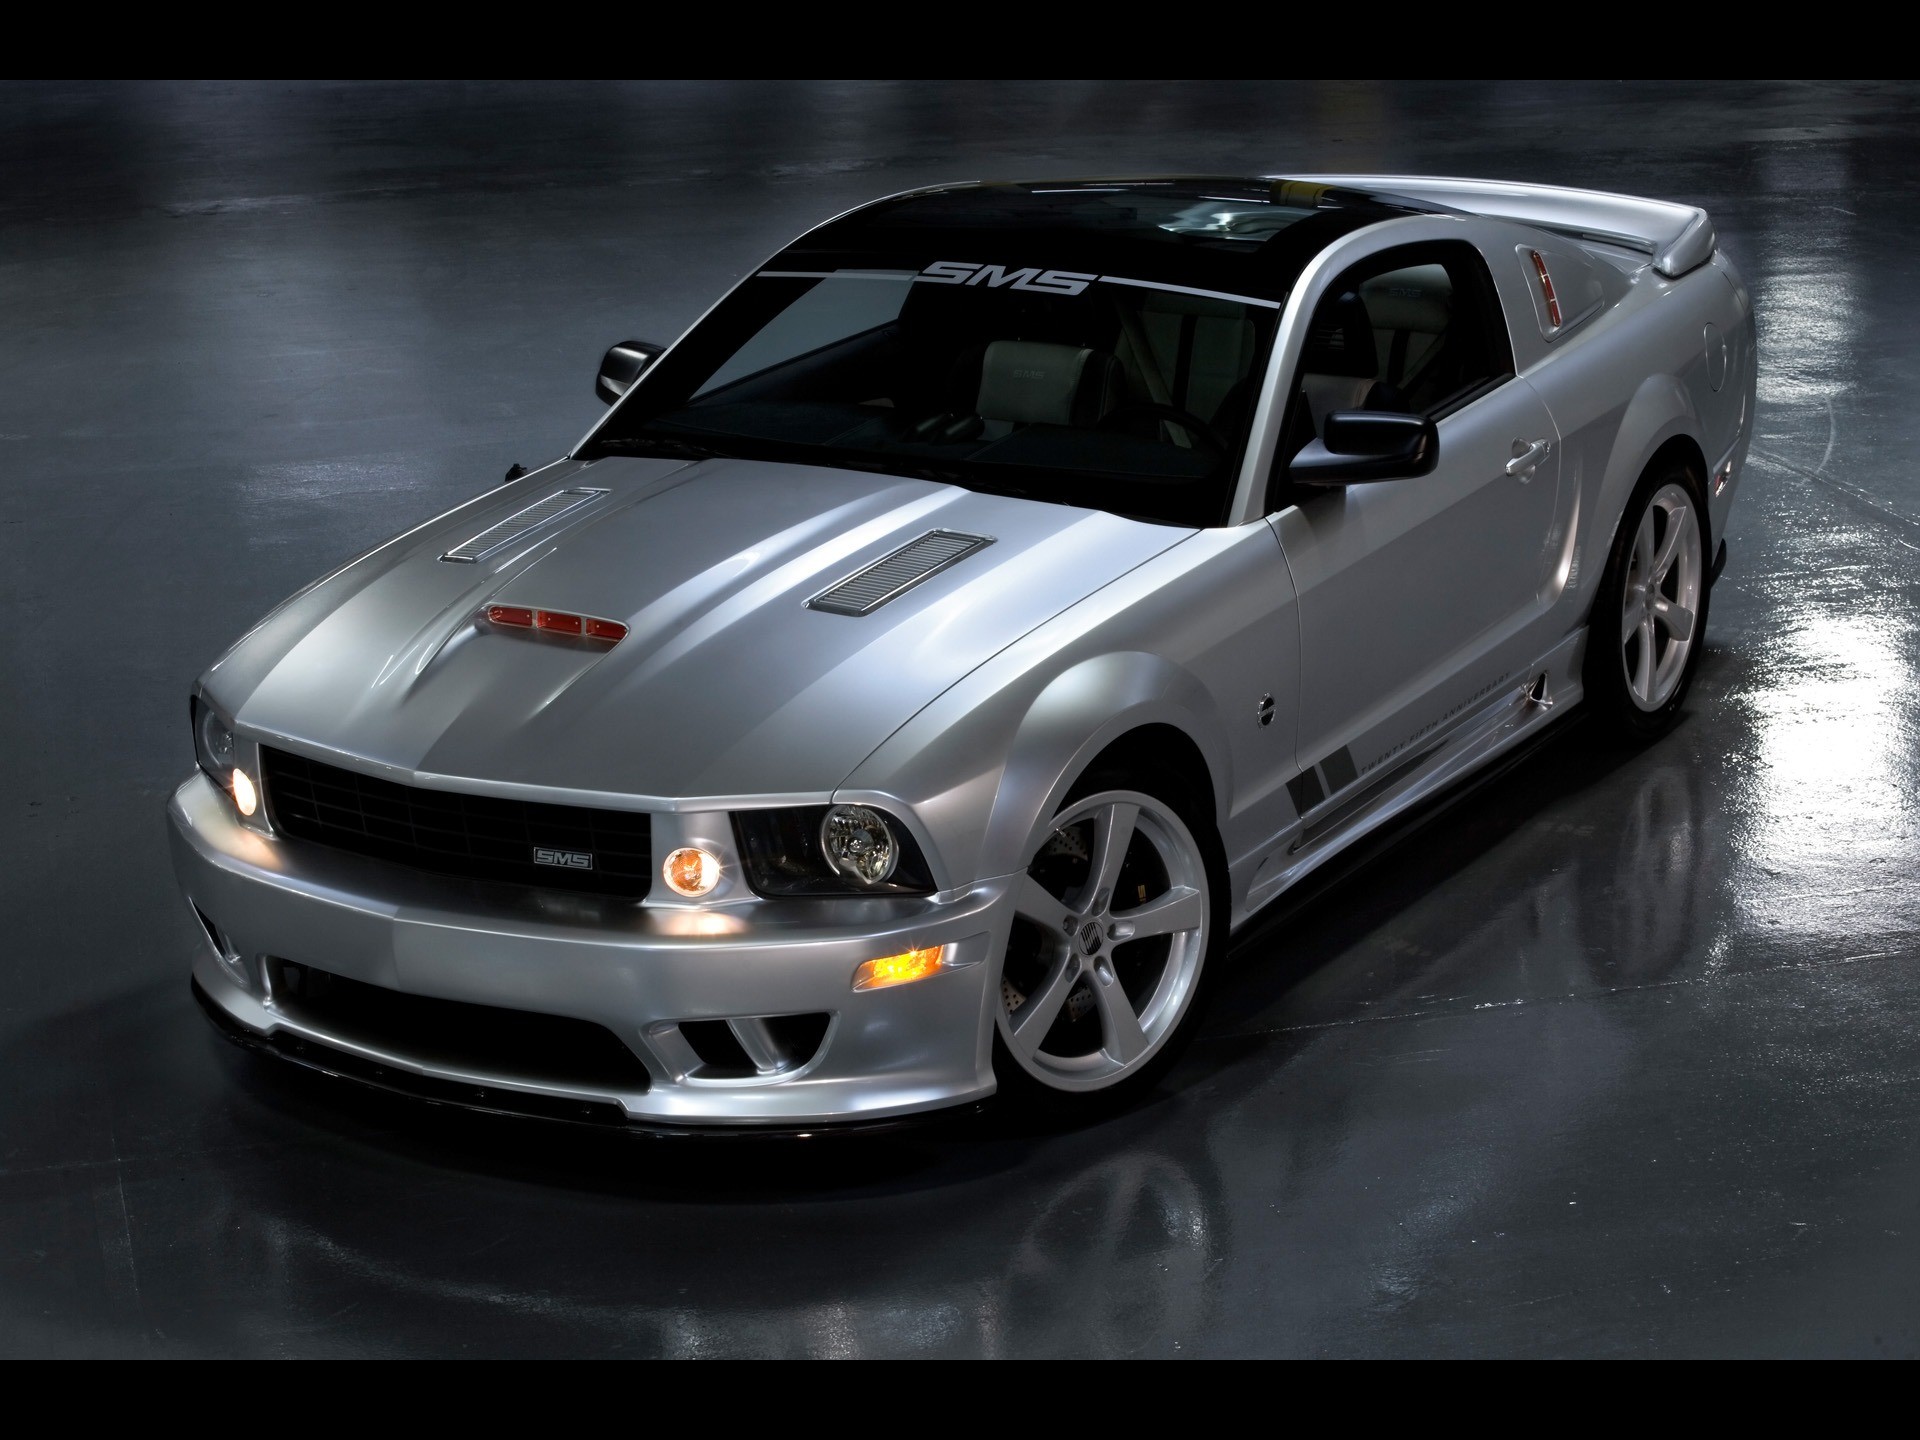 SMS Ford Mustang Concept Wallpaper Ford Cars Wallpapers